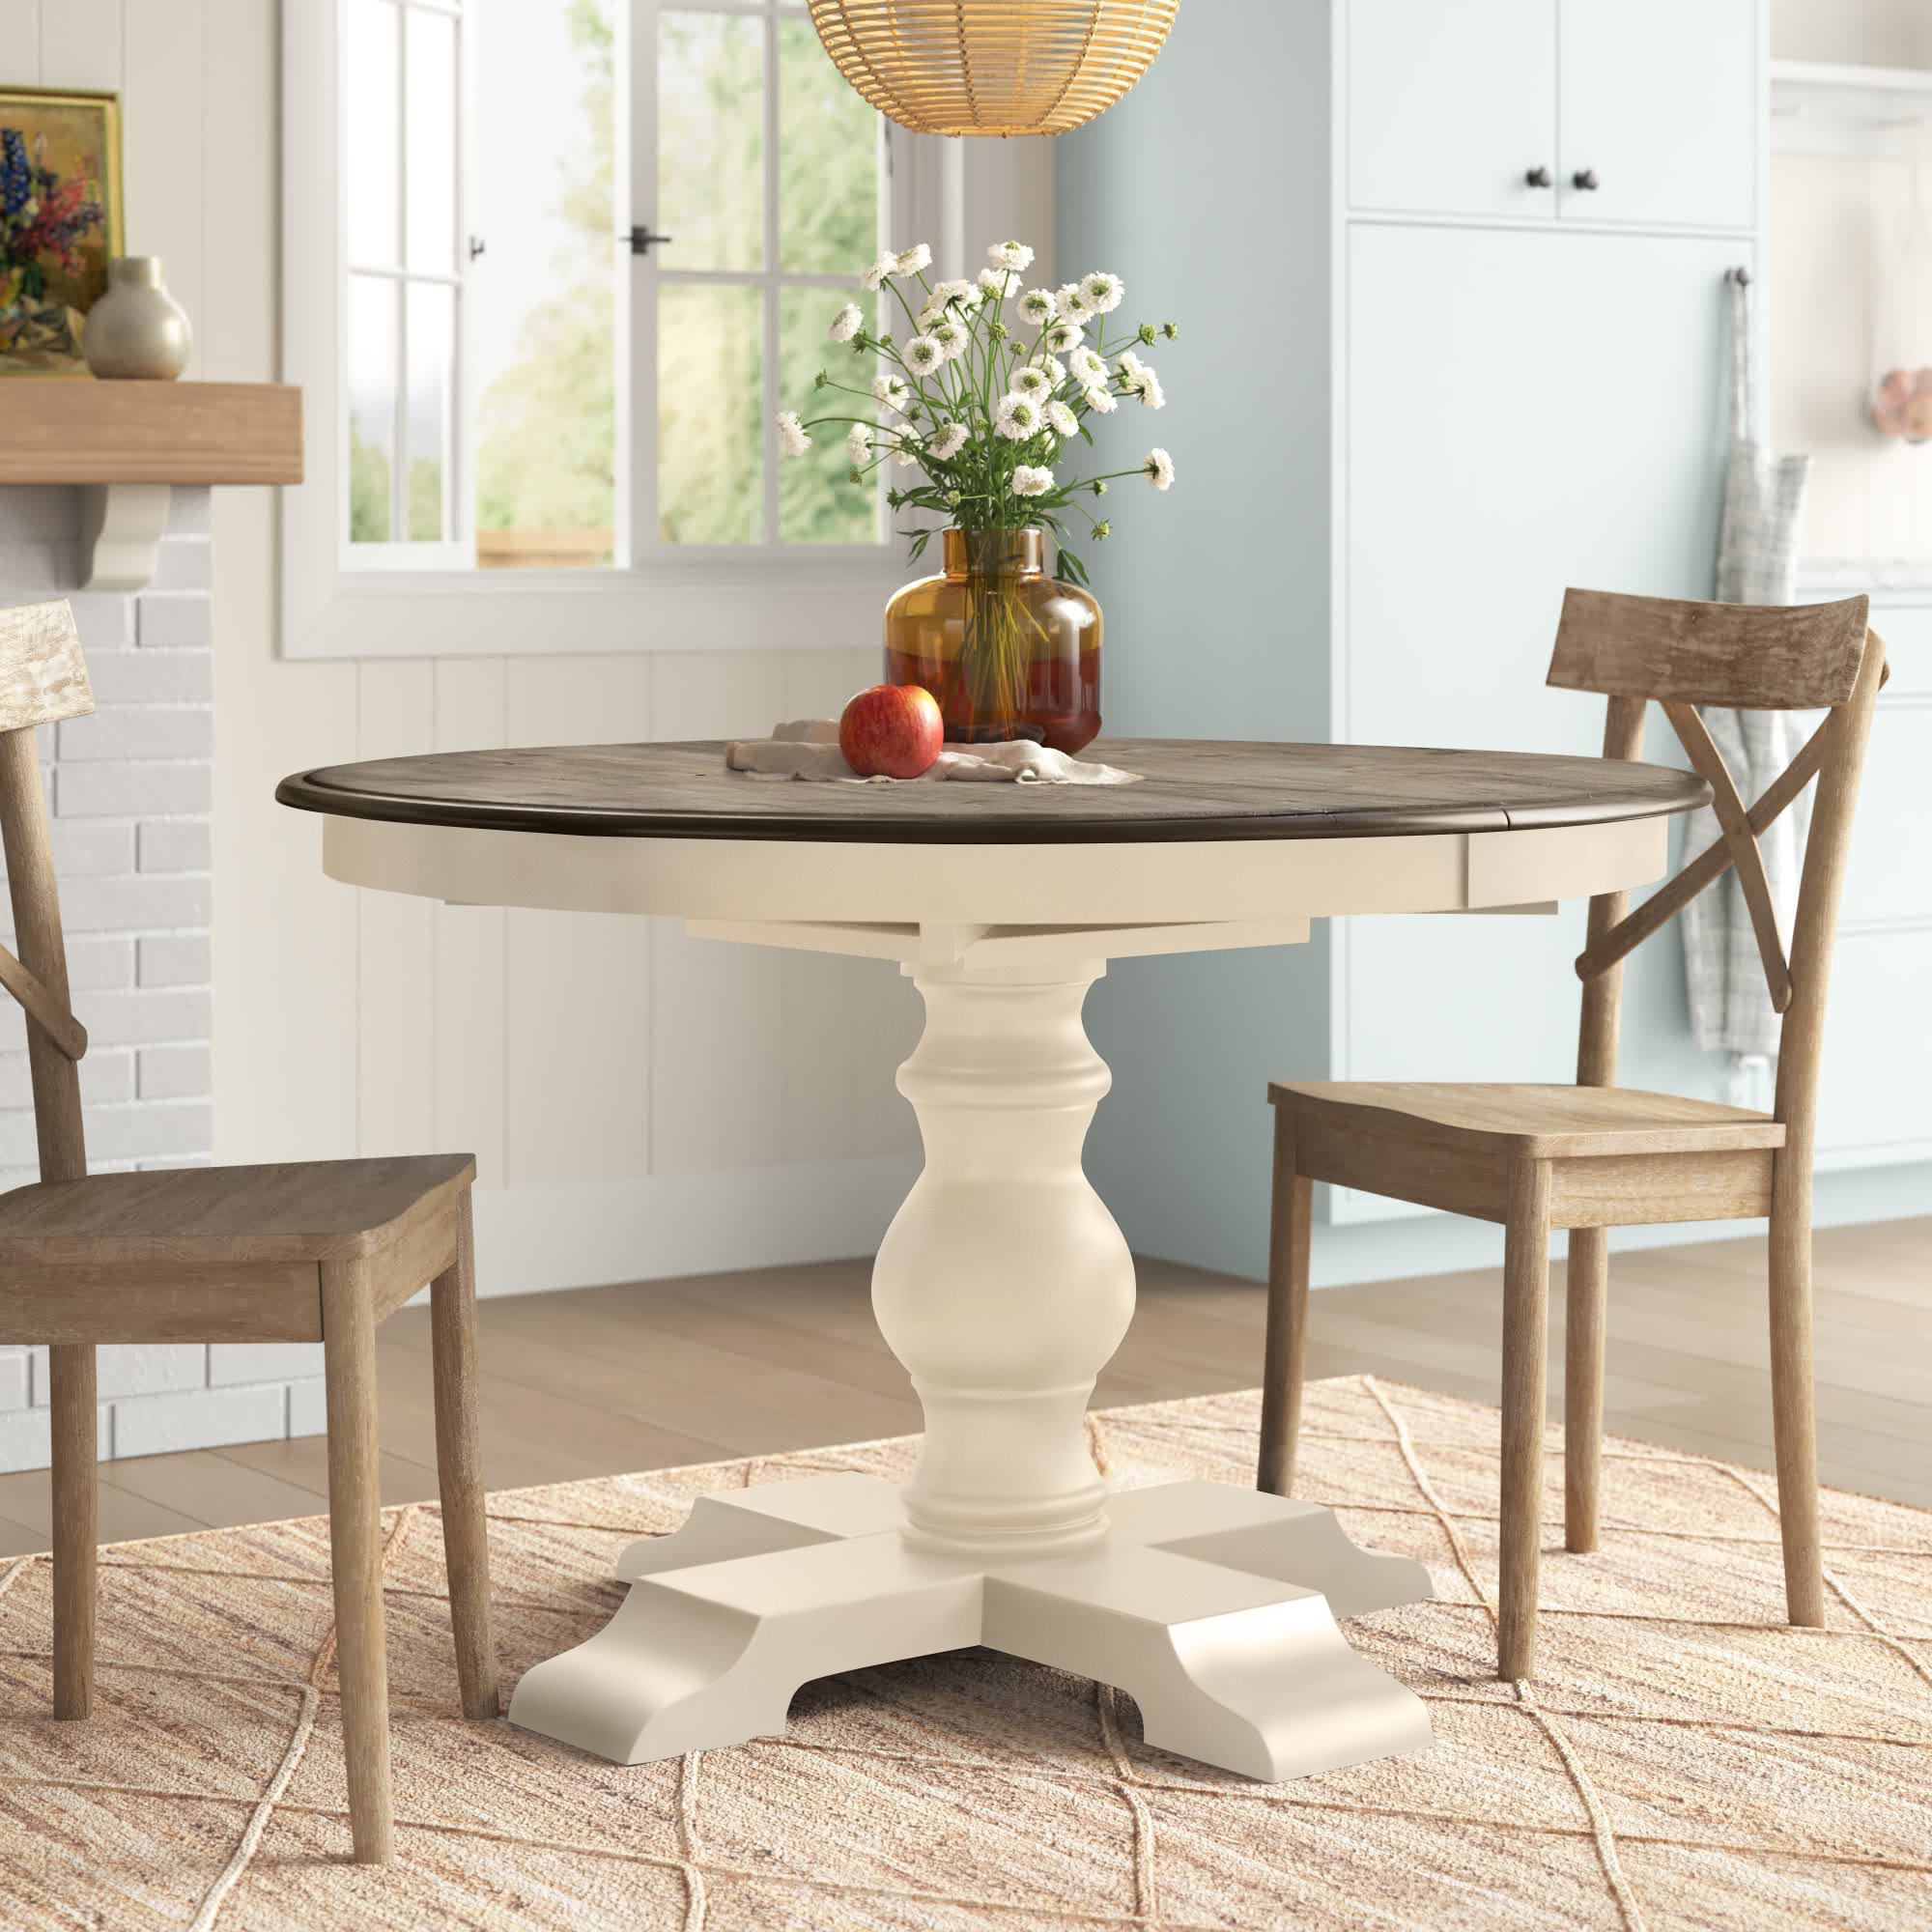 Try out Injection handy Sand & Stable Branson Extendable Solid Wood Pedestal Dining Table & Reviews  | Wayfair